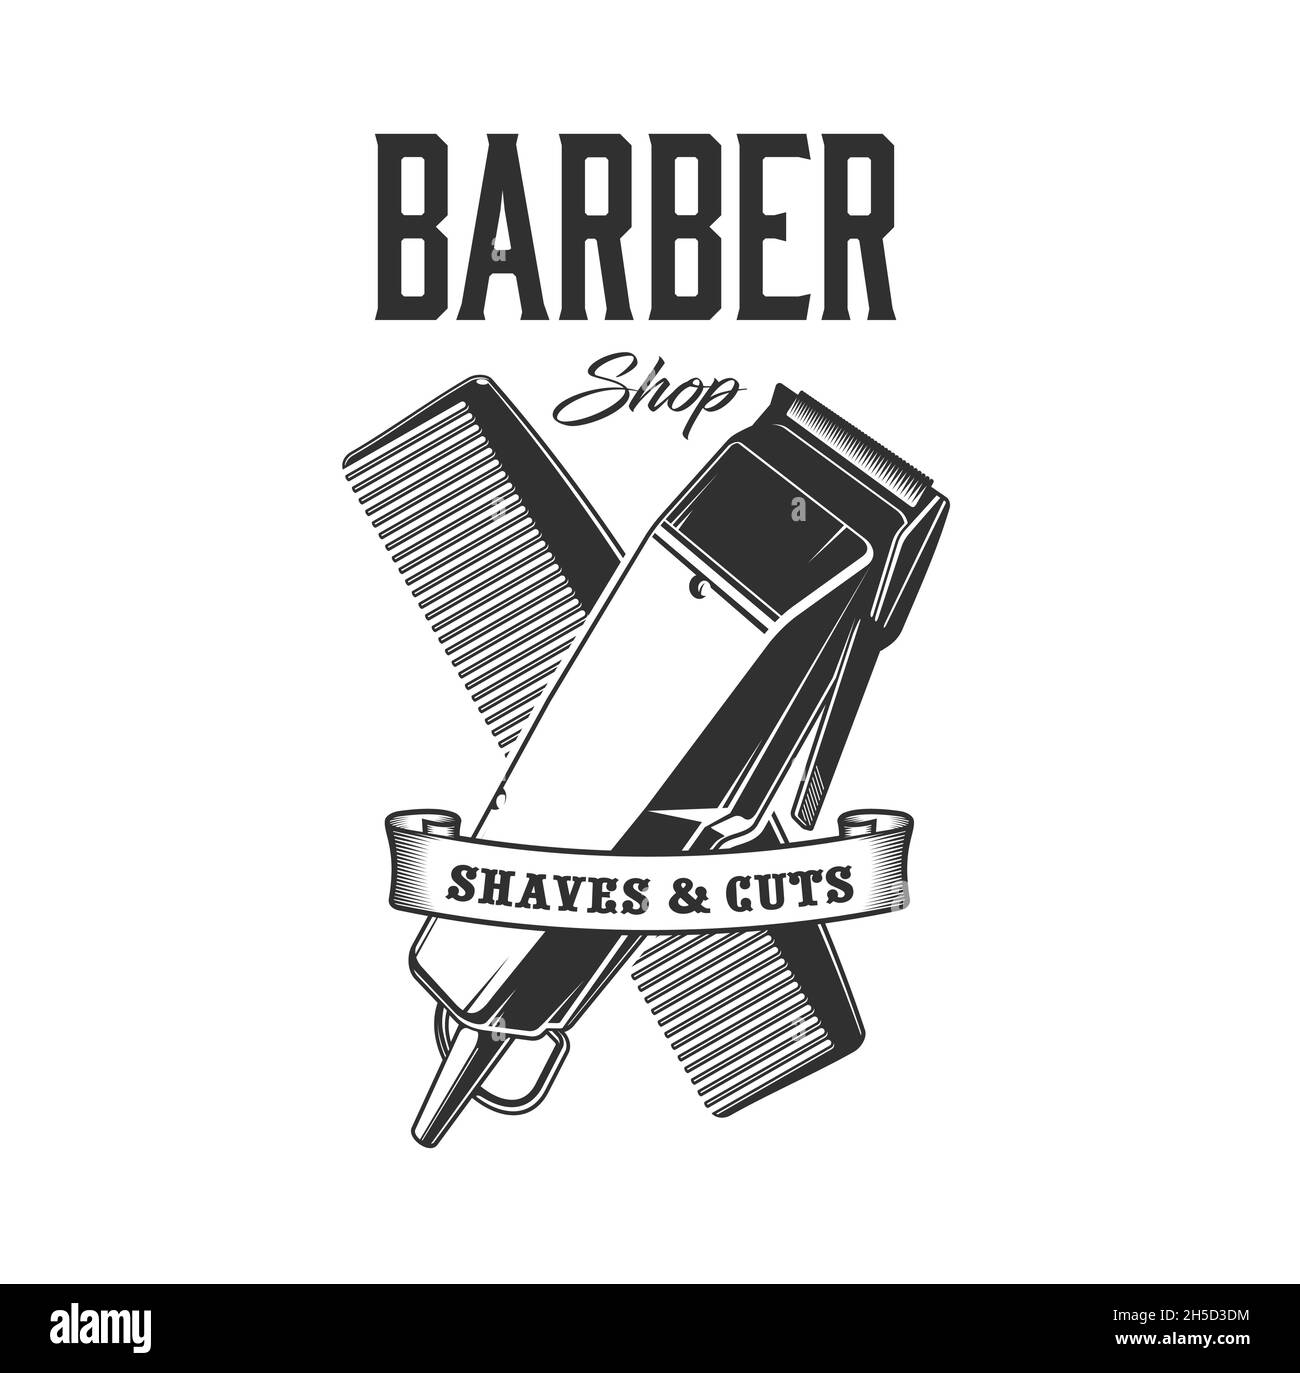 Barbershop shaver or razor and comb icon, vector vintage emblem for shaves and cuts service for men. Haircutting, trim and beard shave retro advert mo Stock Vector